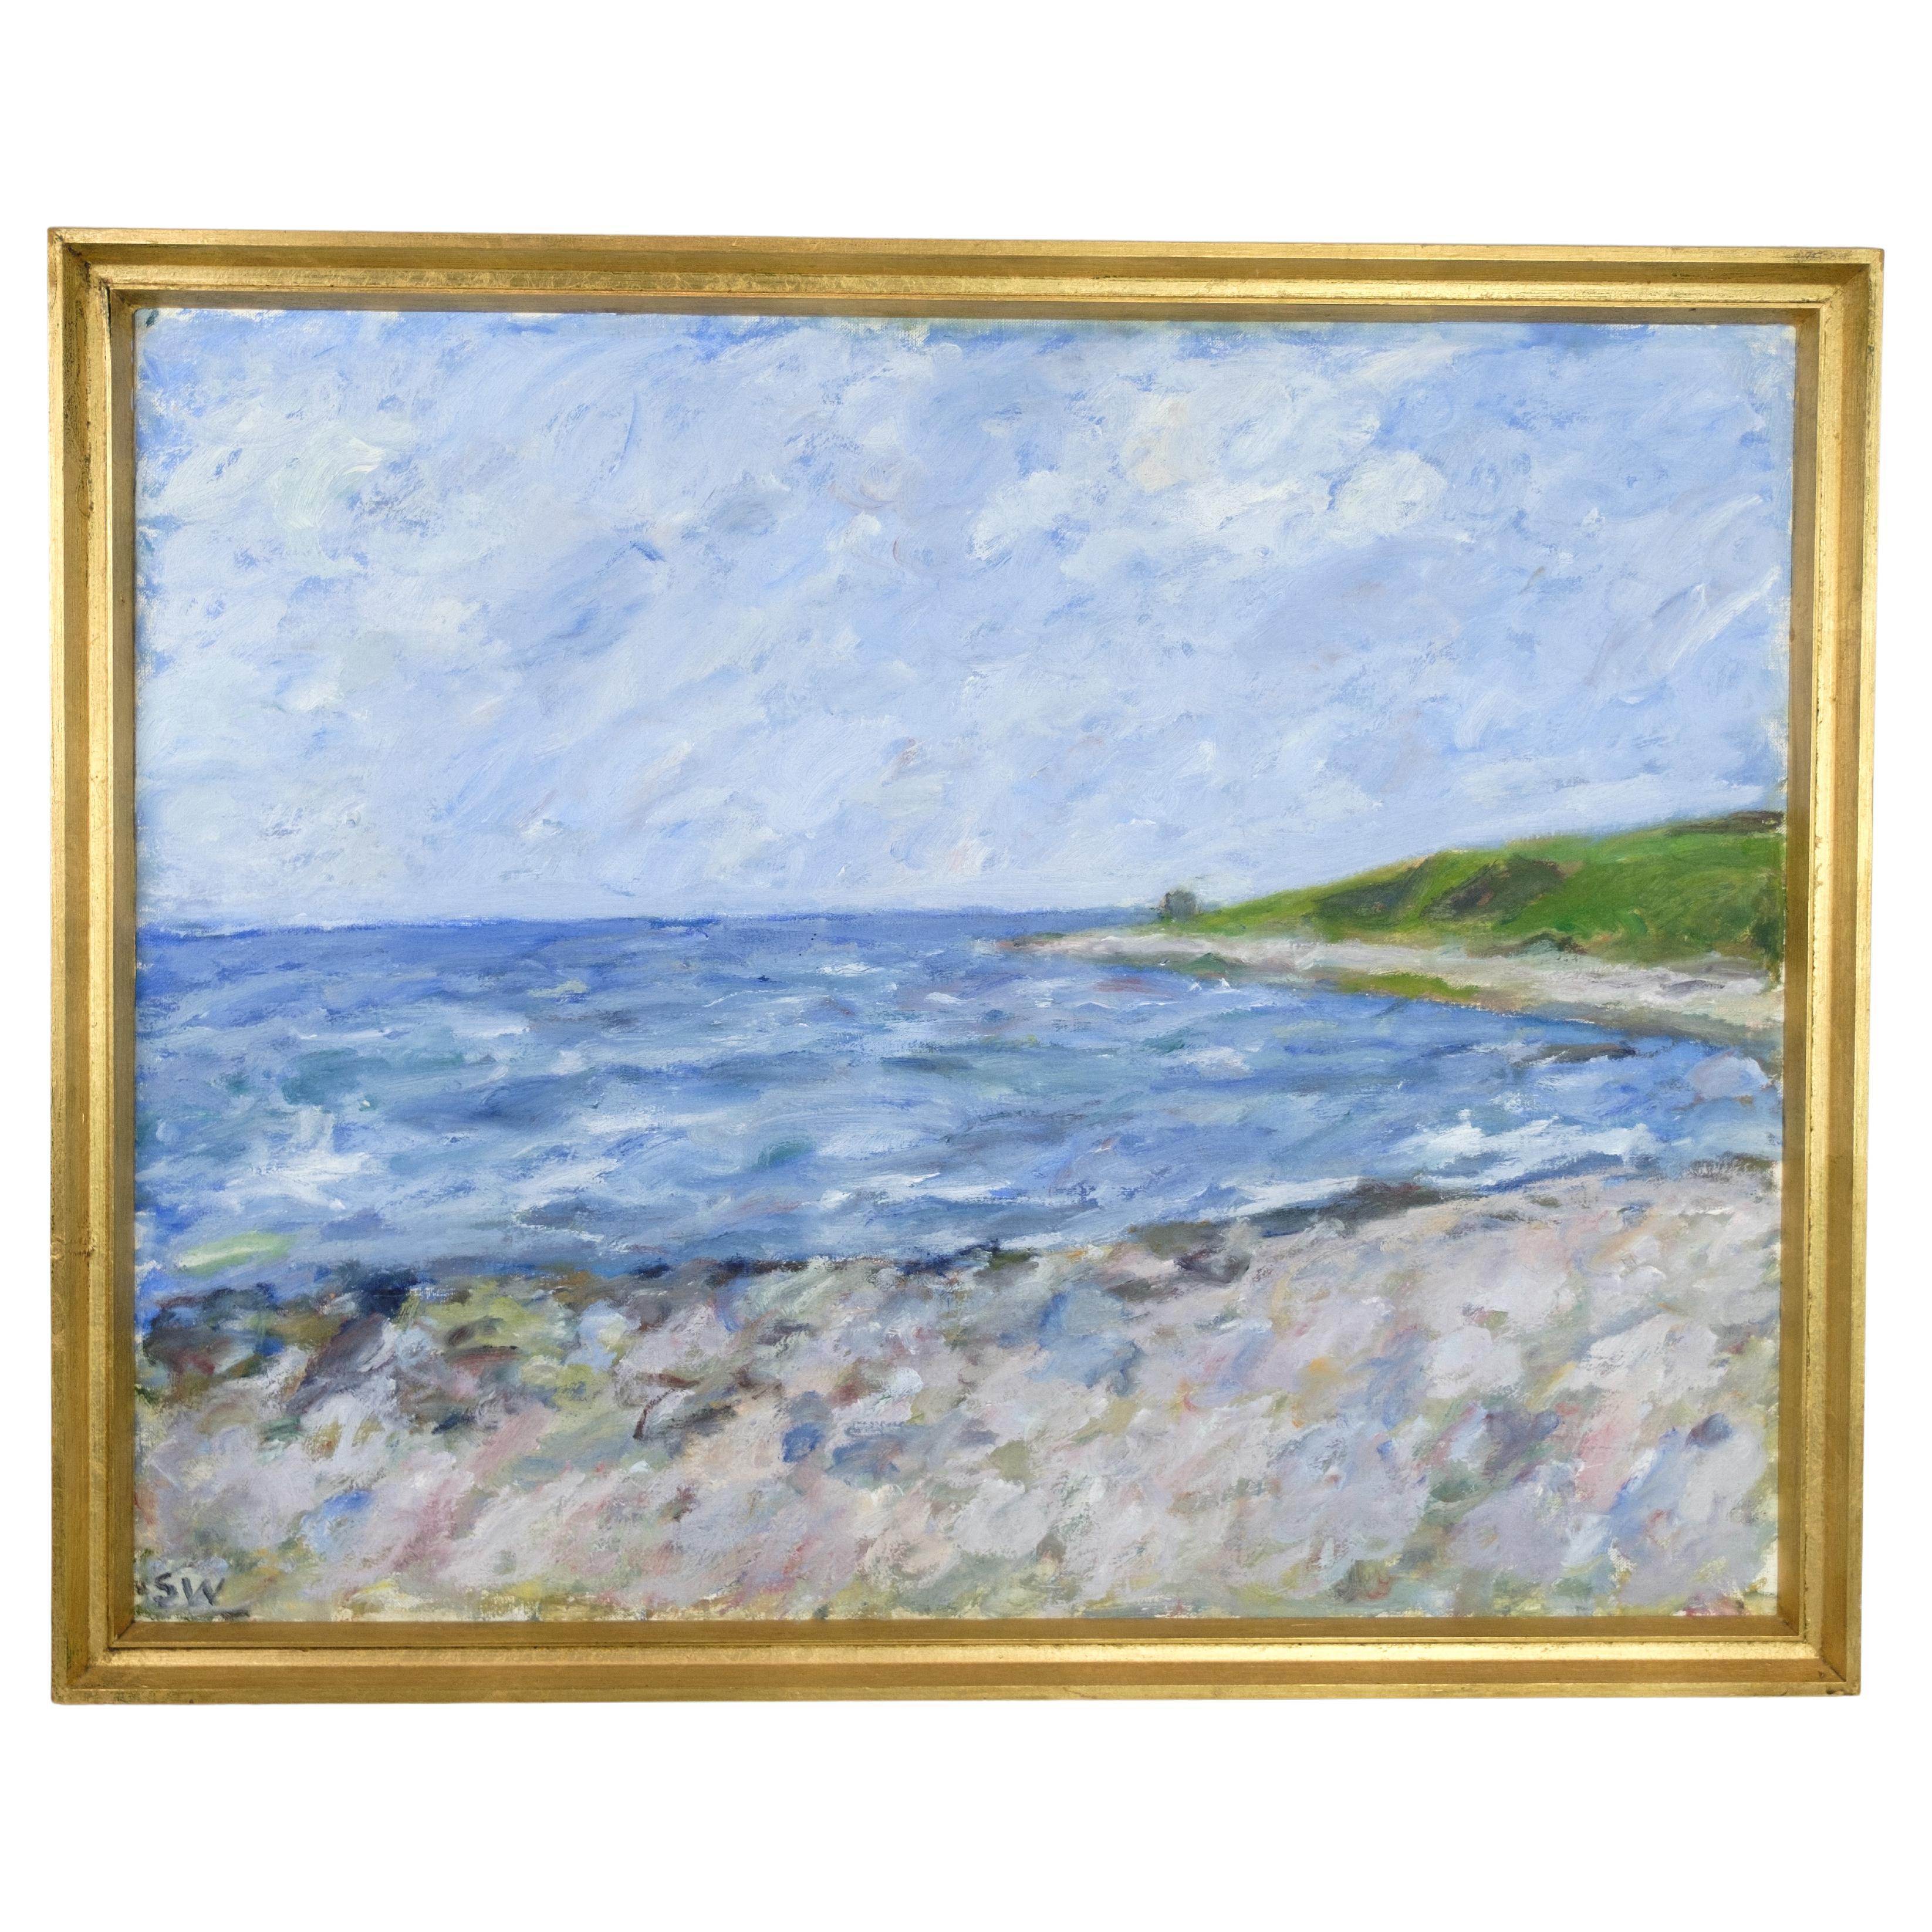 Oil Painting On Canvas With Motif Of Beach & Sea By Sixten Wiklund From 1957s For Sale